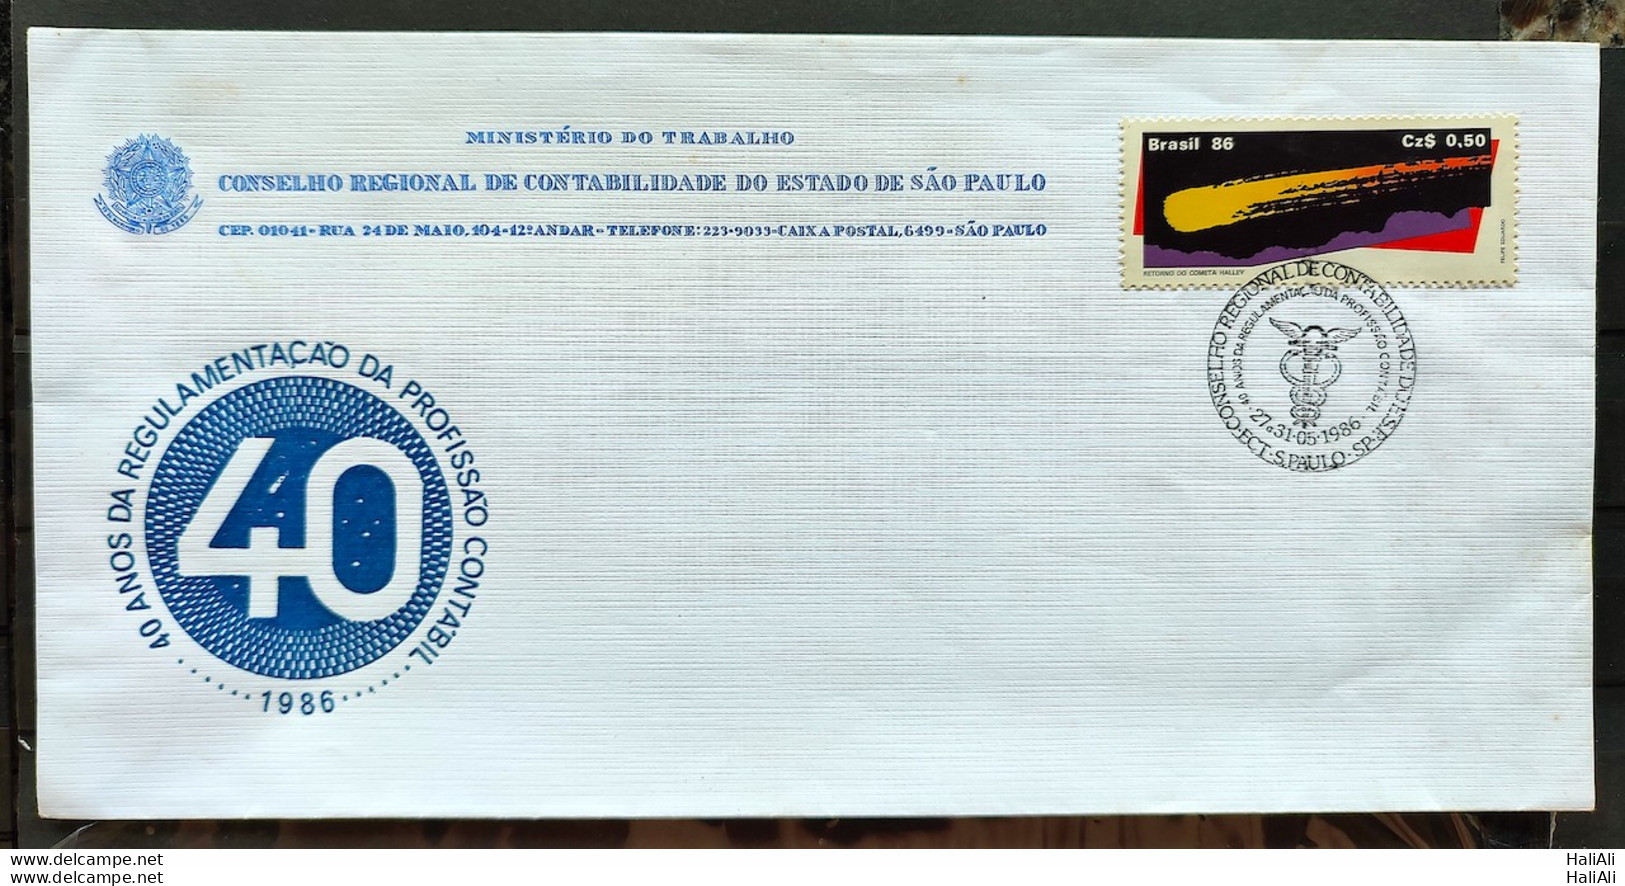 Brazil Envelope PVT 000 1986 Comet Halley Astronomy Ministry Of Labor CBC SP - FDC